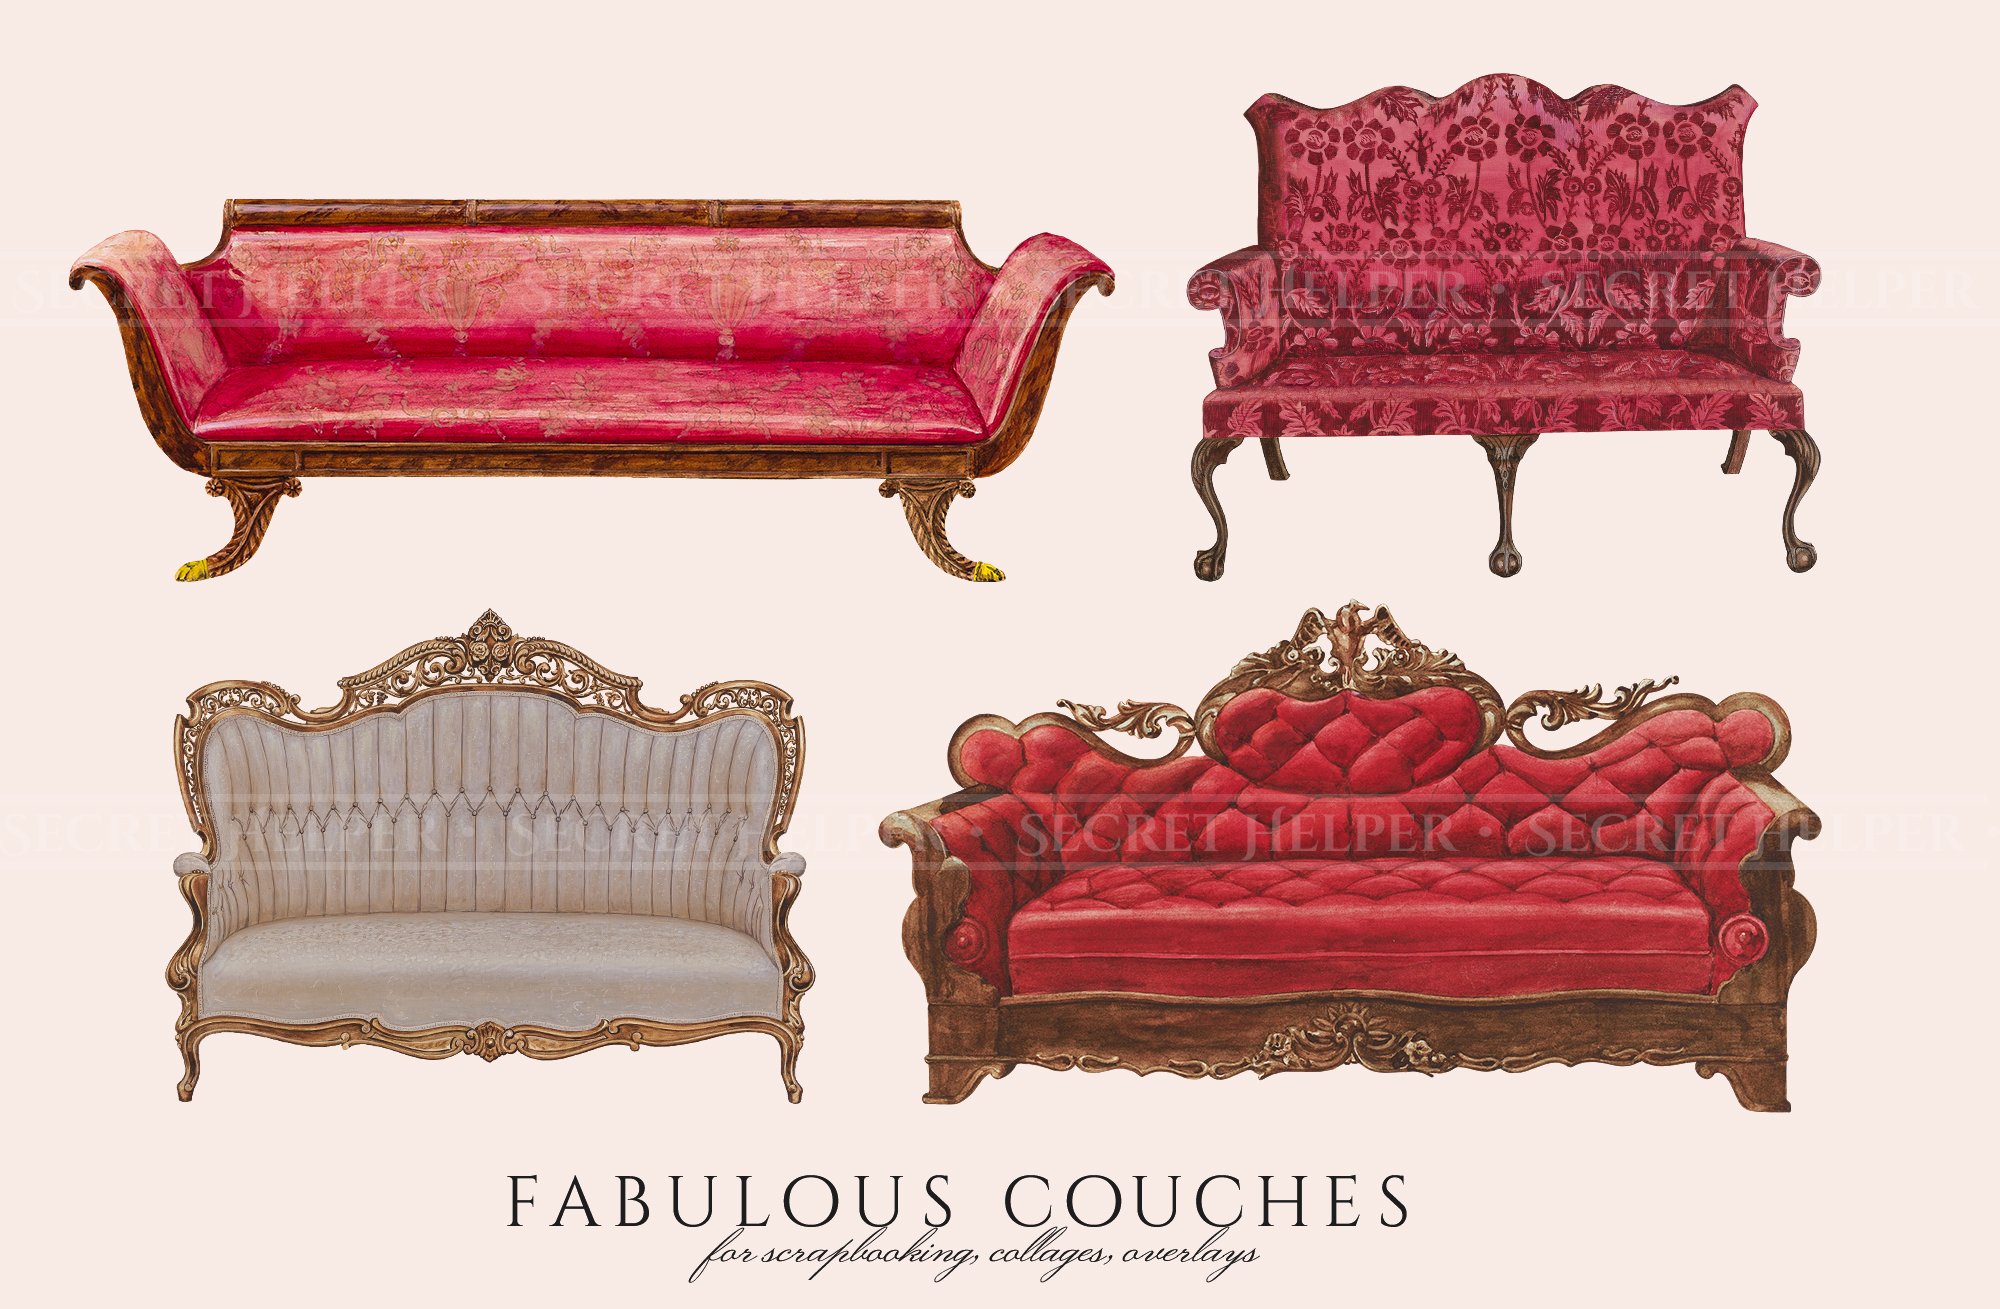 vintage couch clipart